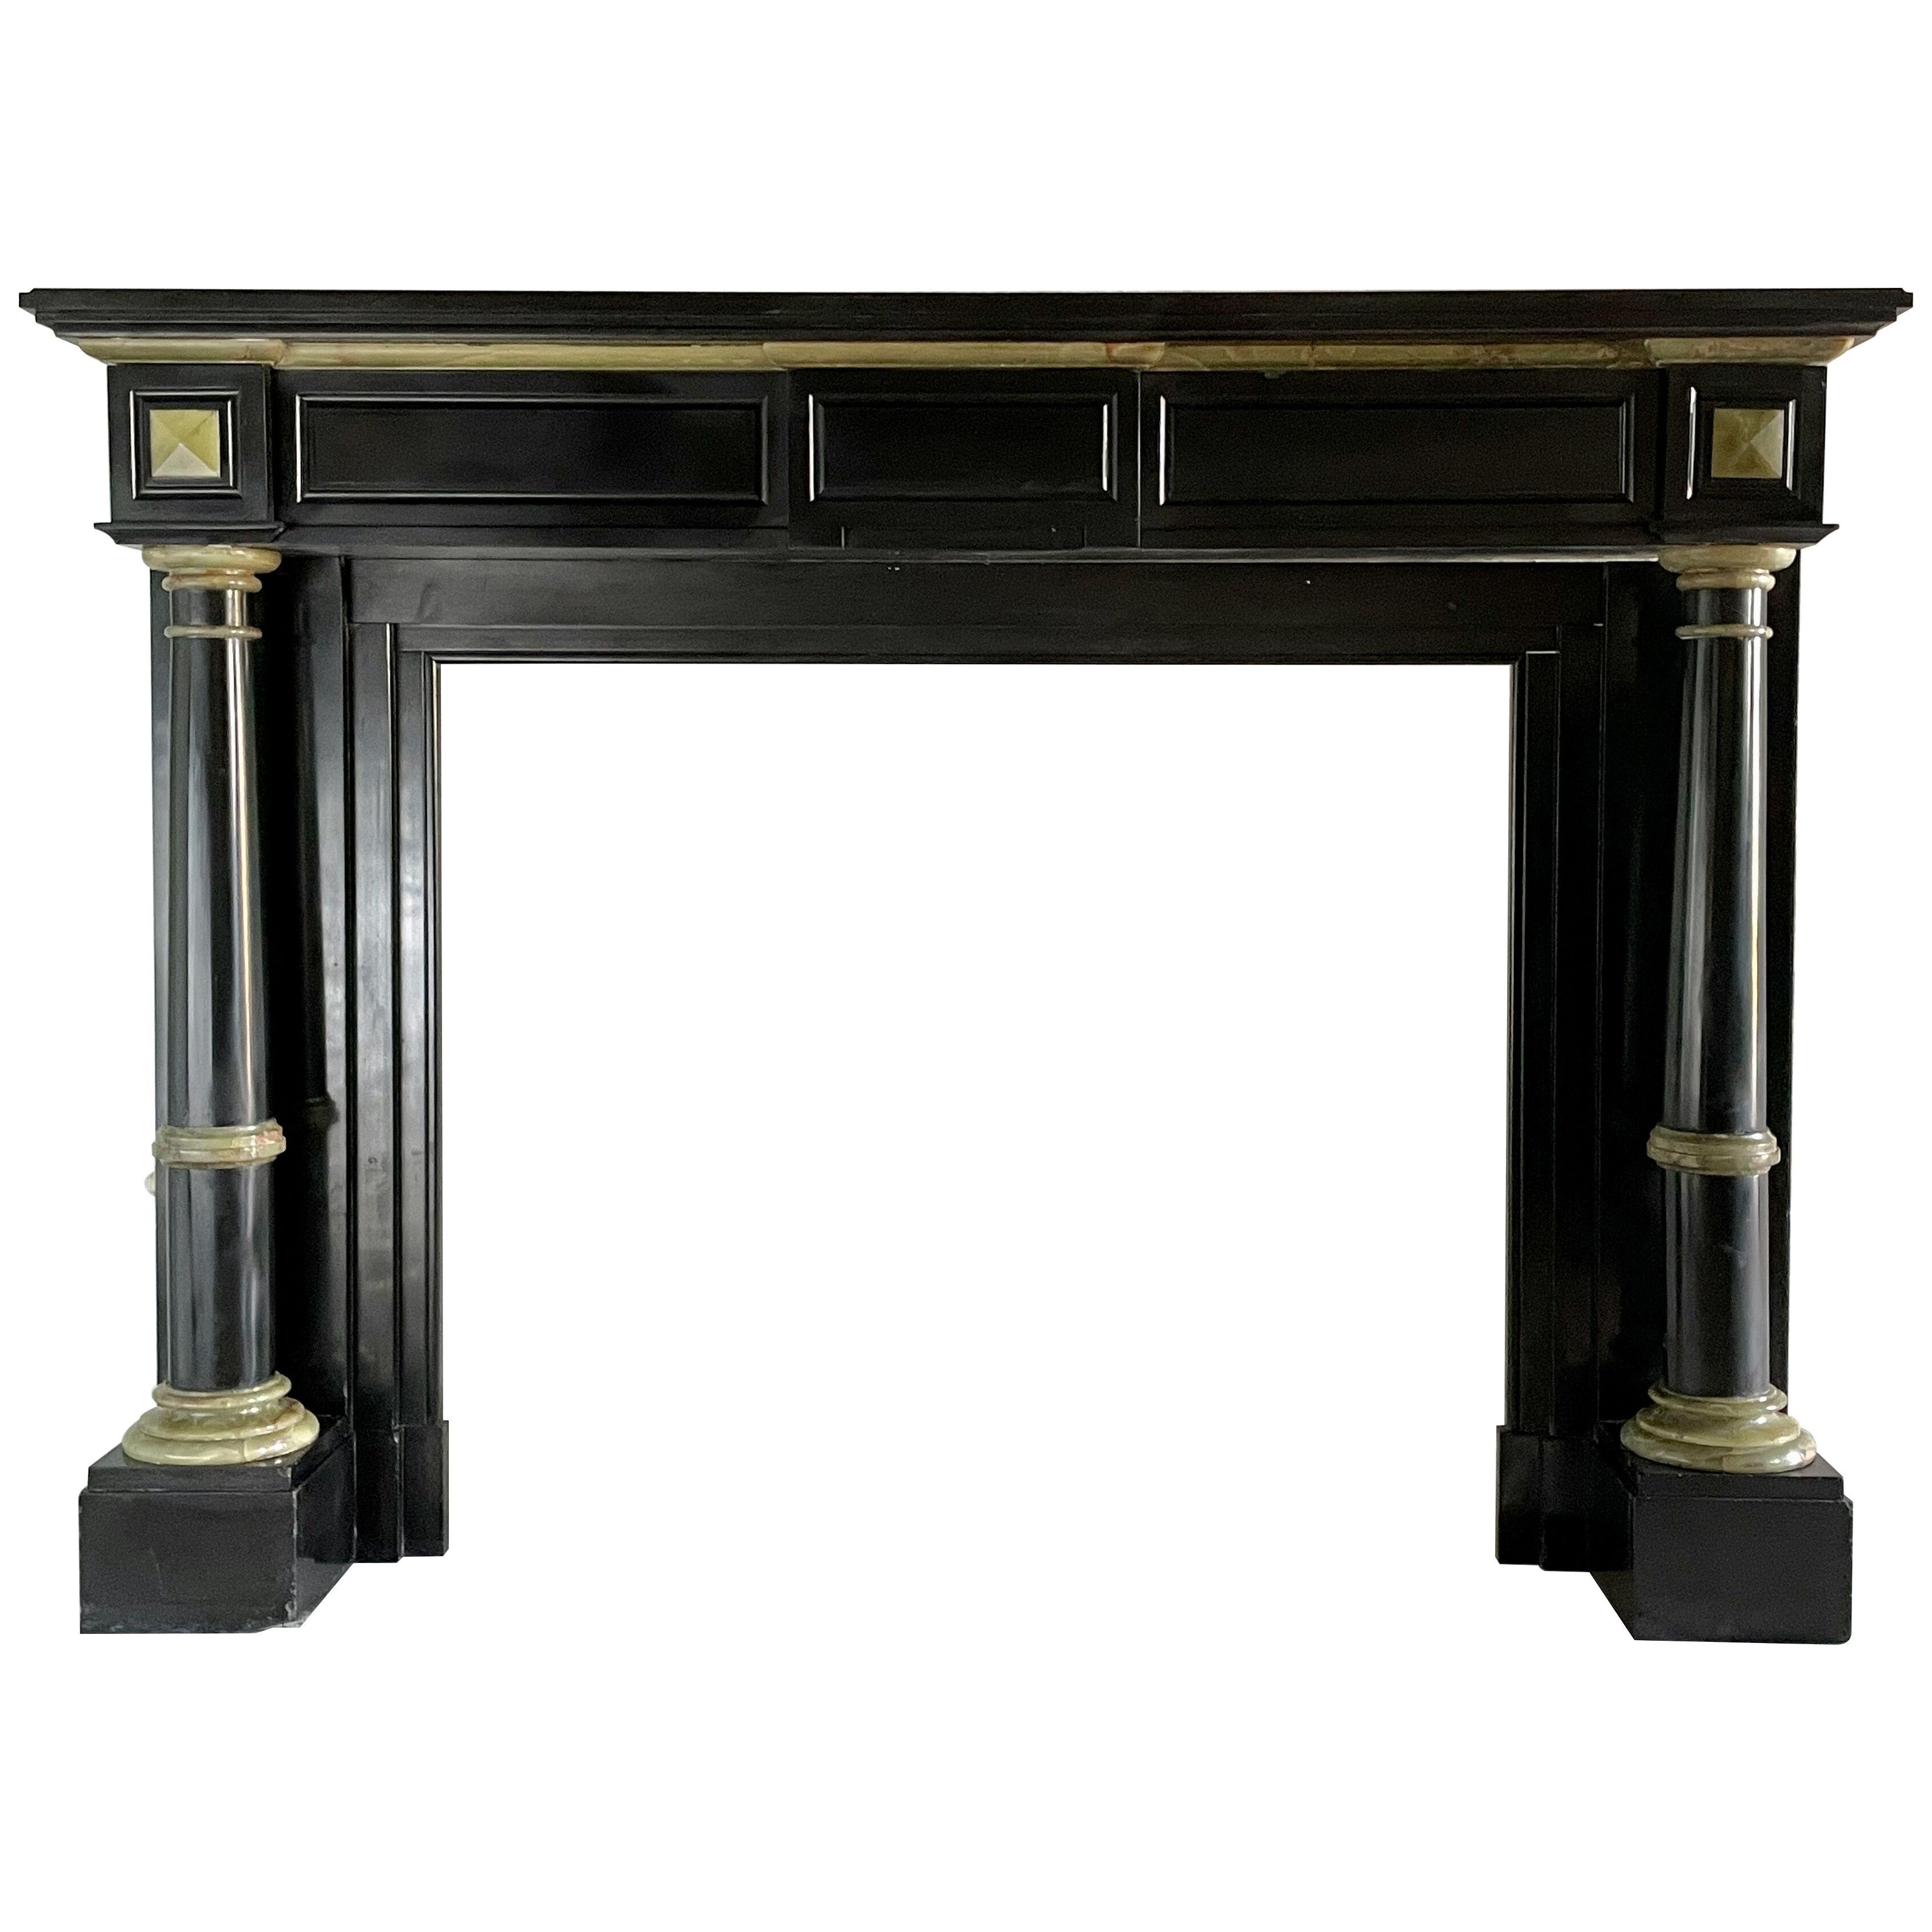 Early 19th century Empire marble mantel 